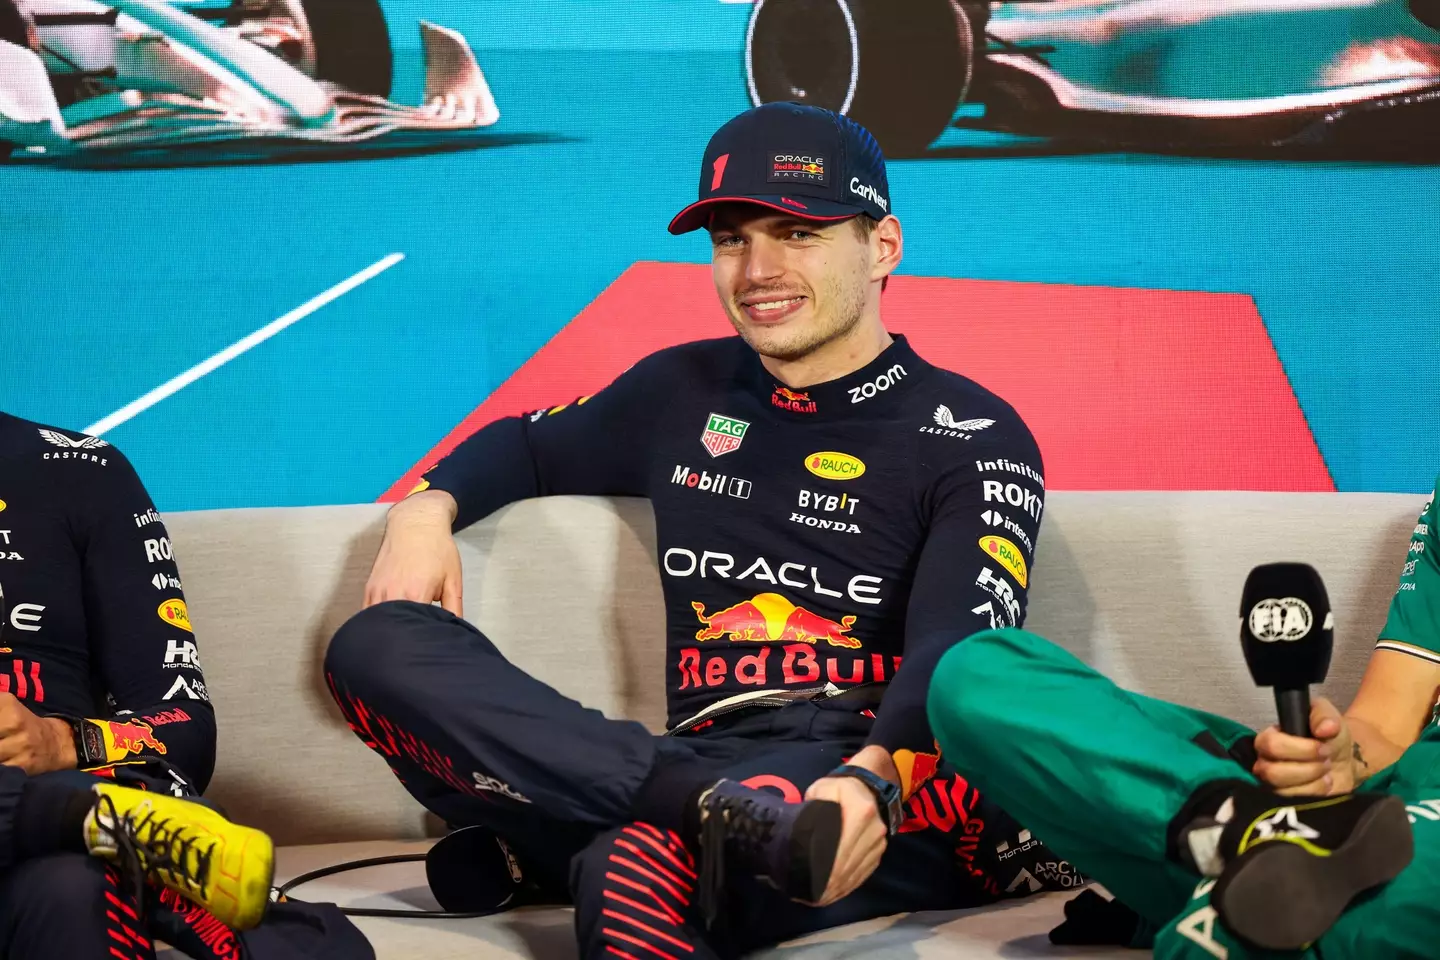 Verstappen clearly wasn't too bothered by the boos. Image: Alamy